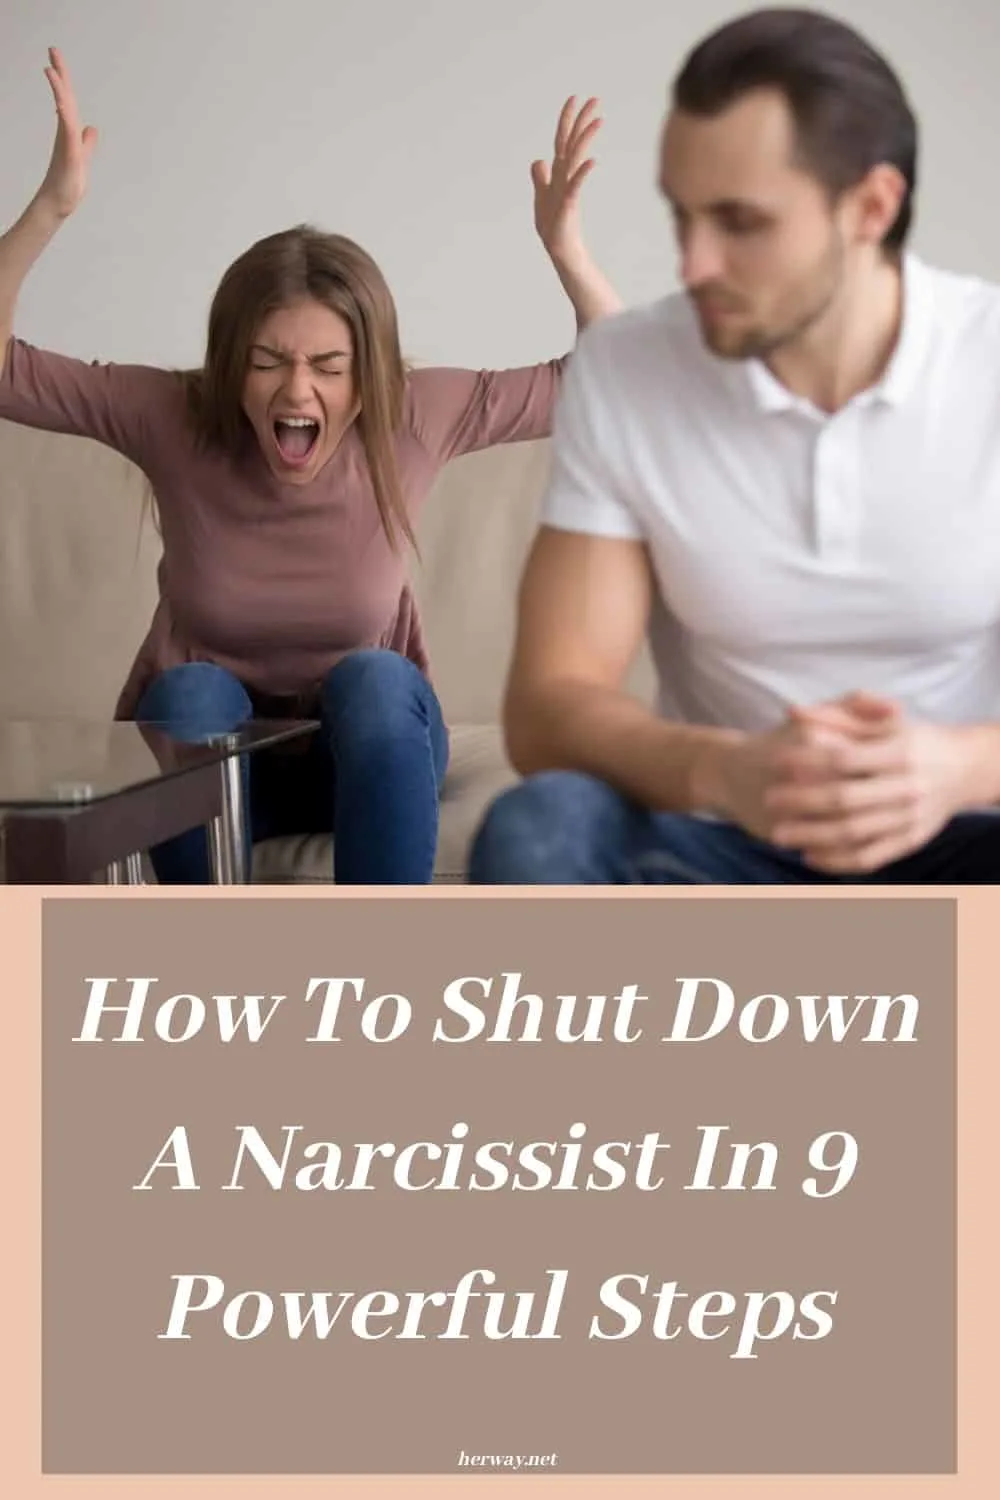 How To Shut Down A Narcissist In 9 Powerful Steps 